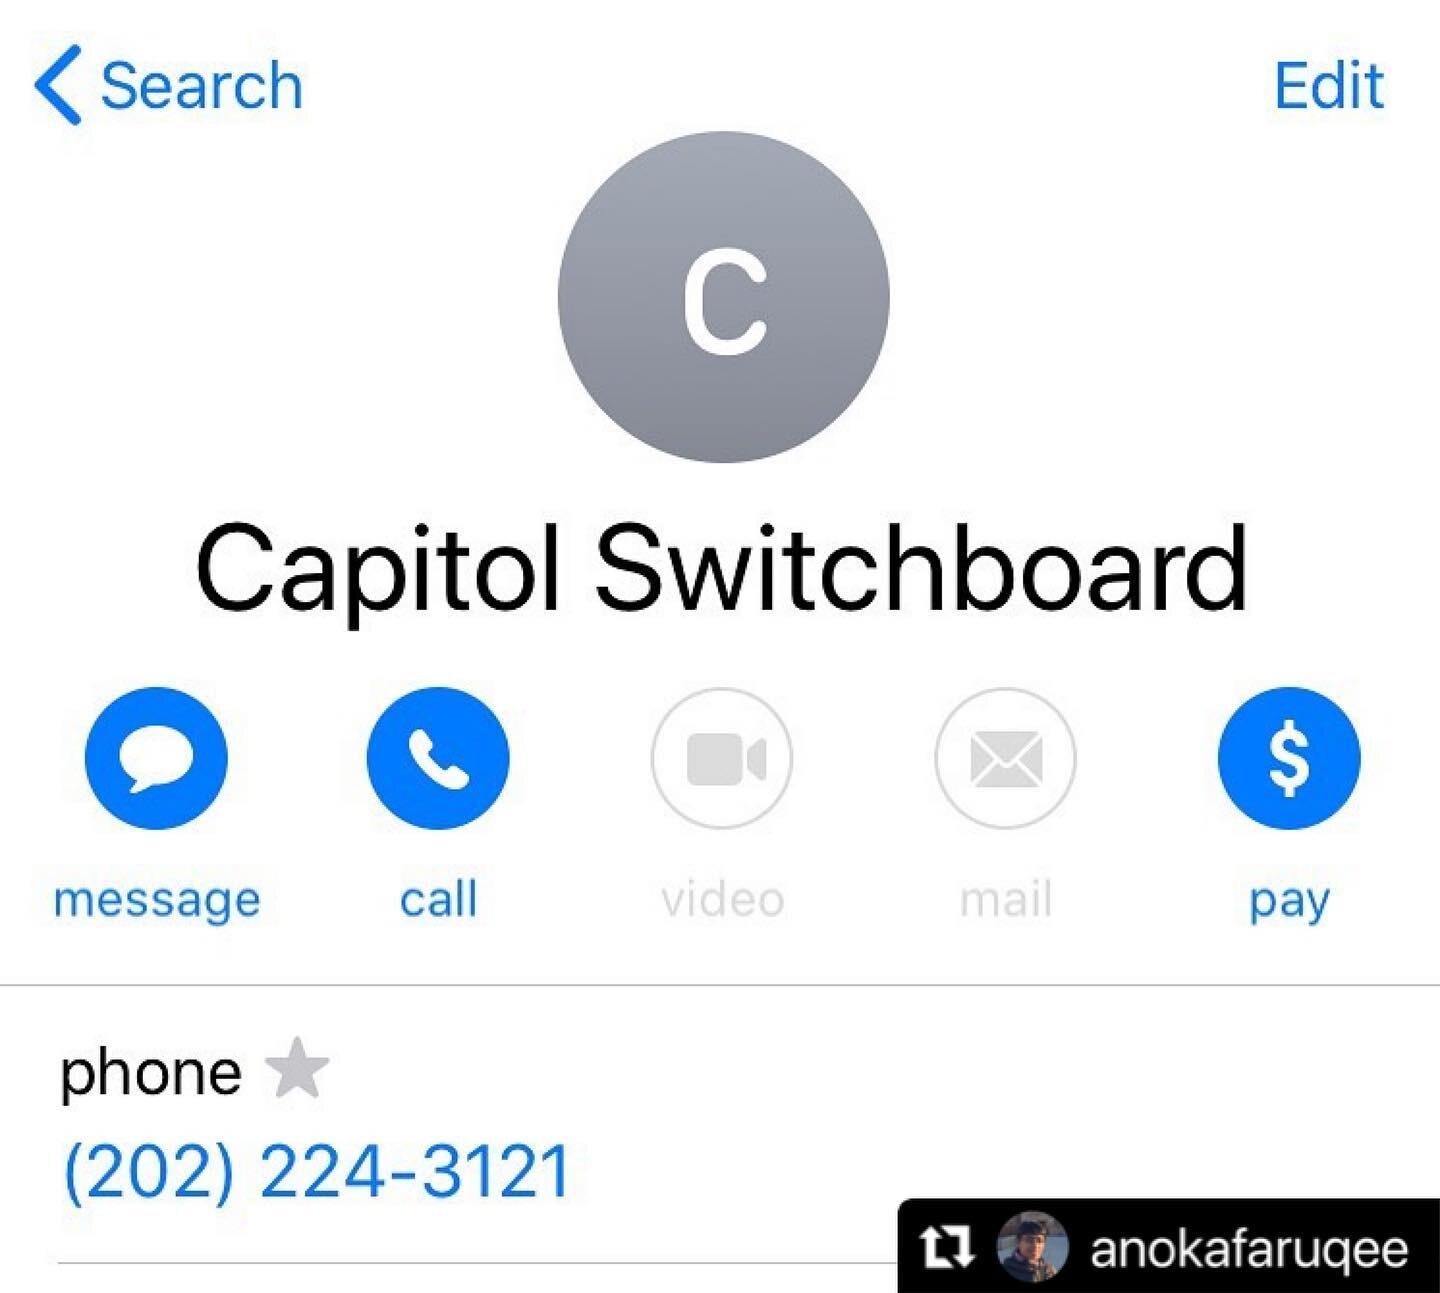 Reposting, thanks  @anokafaruqee 
・・・
You can call your congresspeople and Senators and tell them you support impeachment because the President incited an armed insurrection against the legislative branch of the US government. Unless we hold all lead